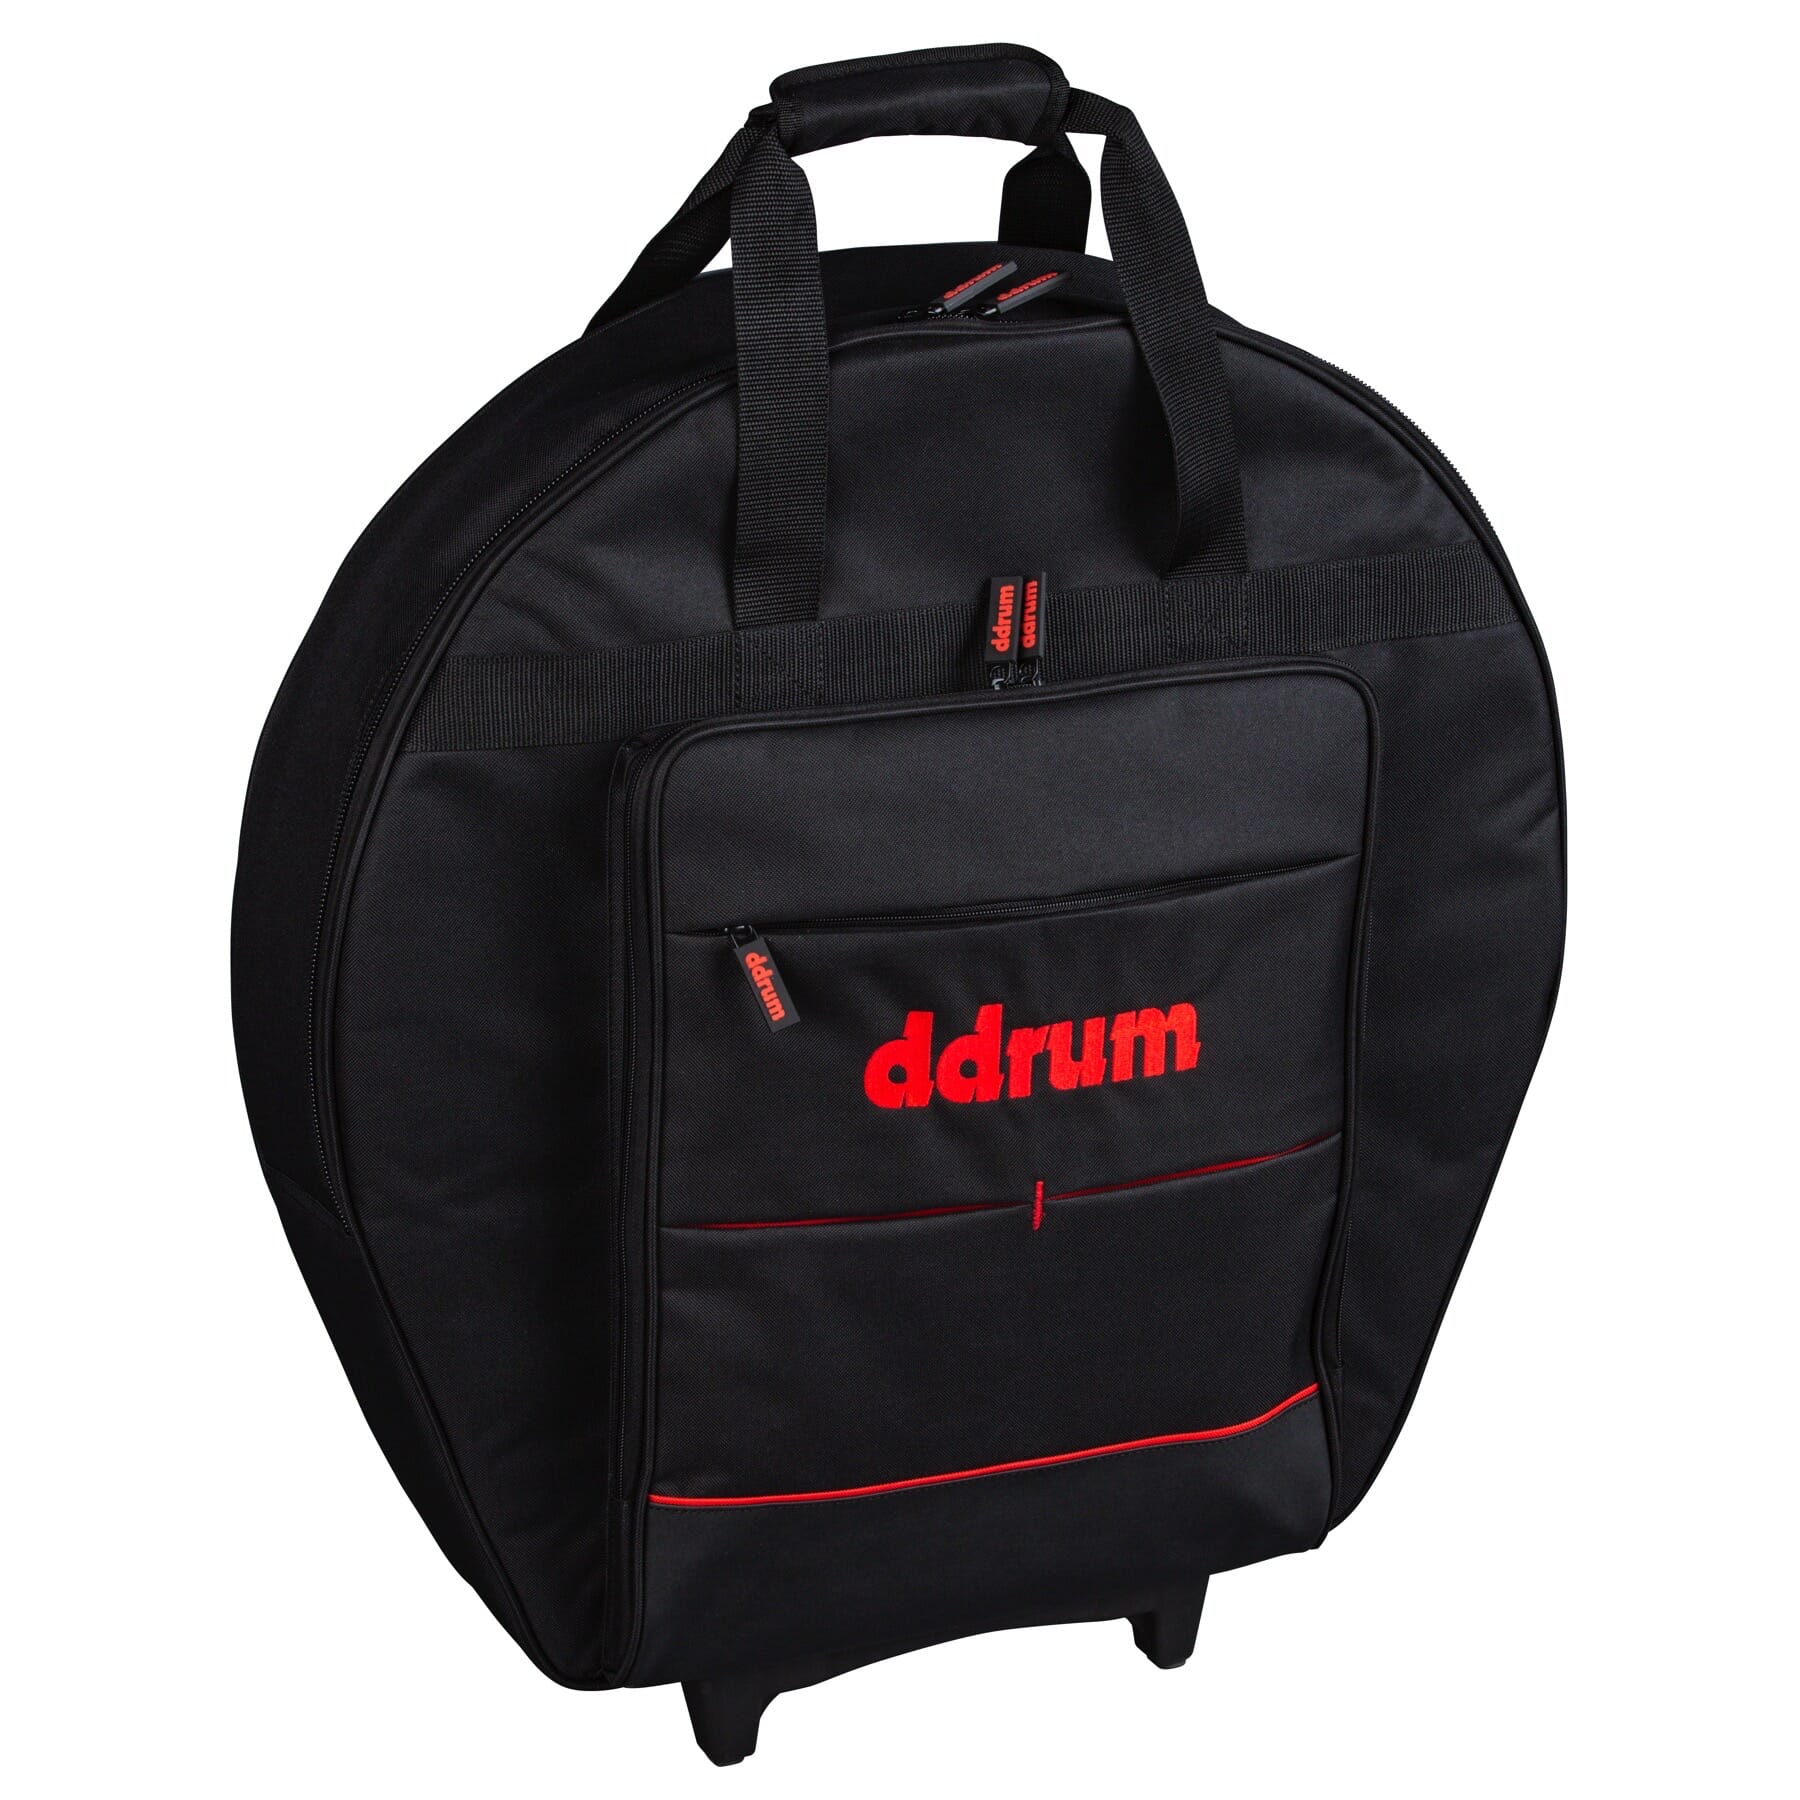 ddrum deluxe cymbal bag with telescoping handle and wheels